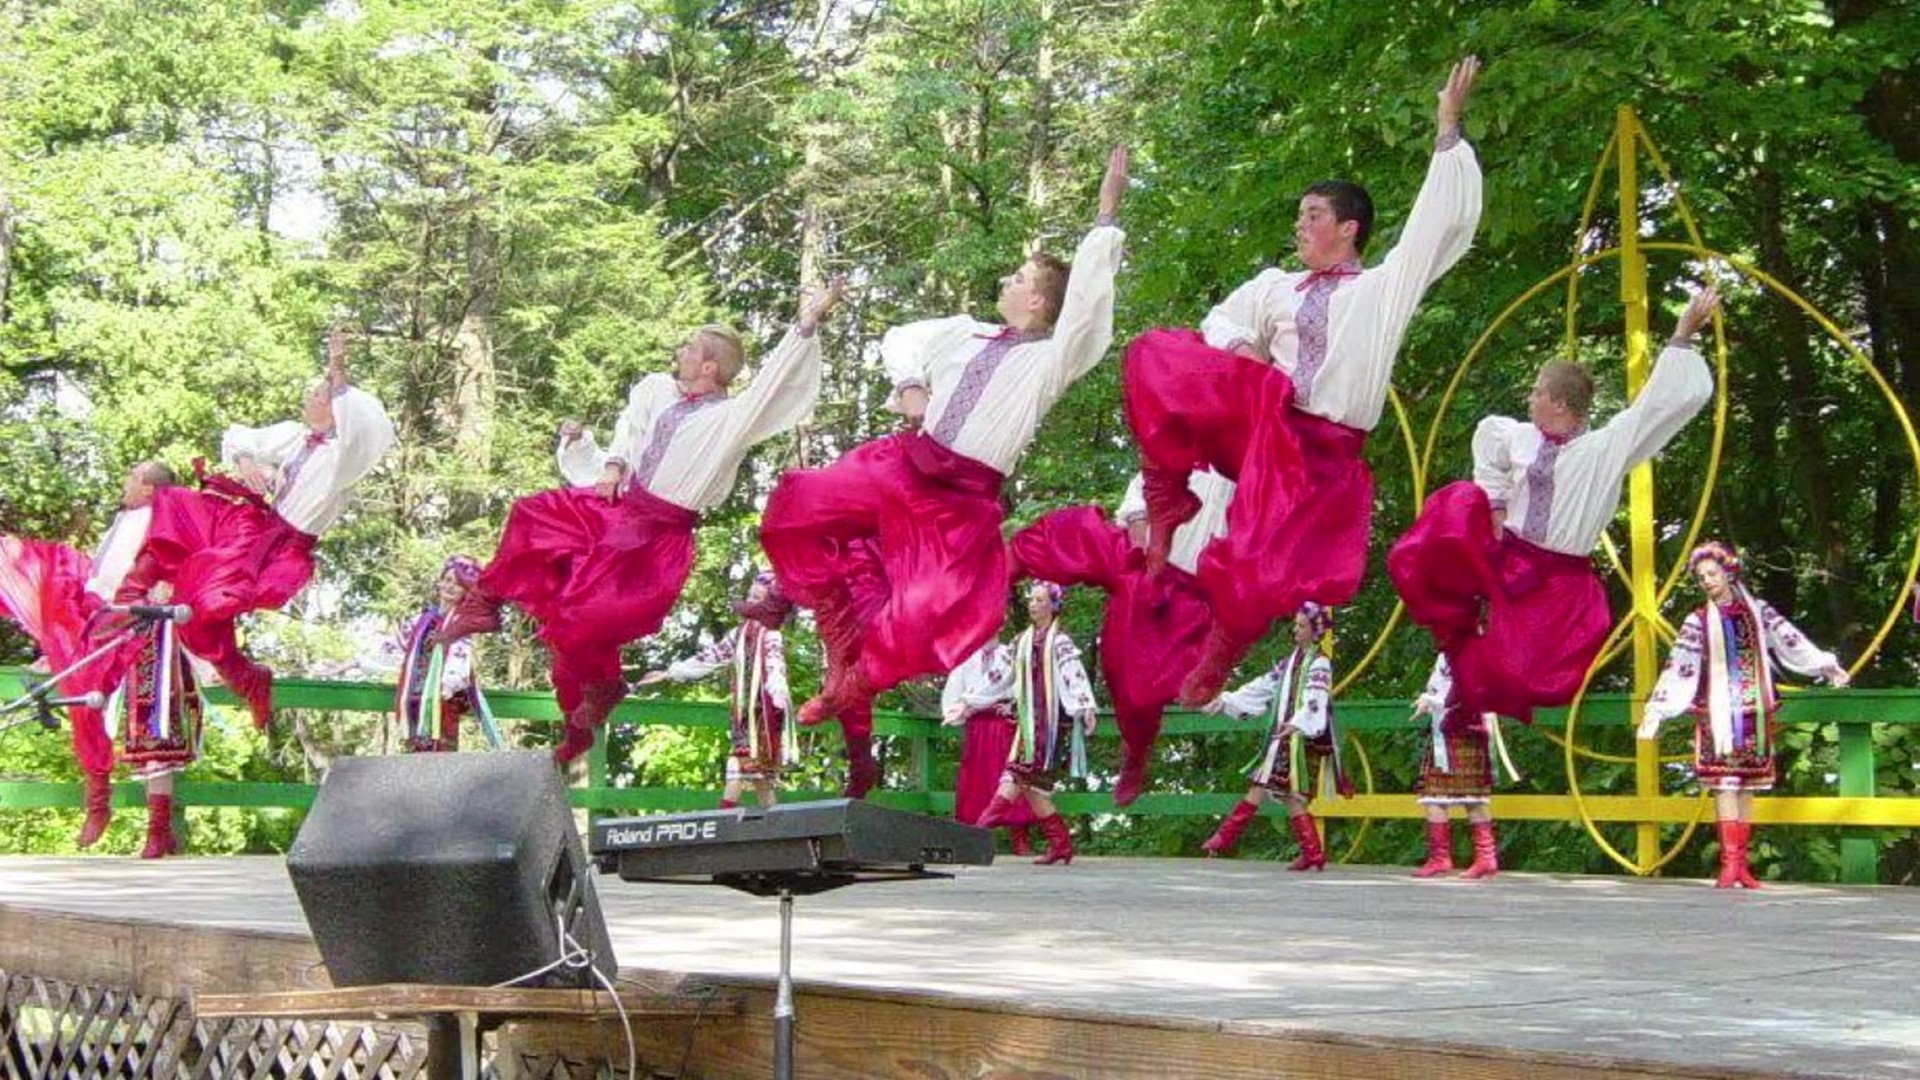 The festival offers an experience of Ukrainian culture through food, music, and vendors.